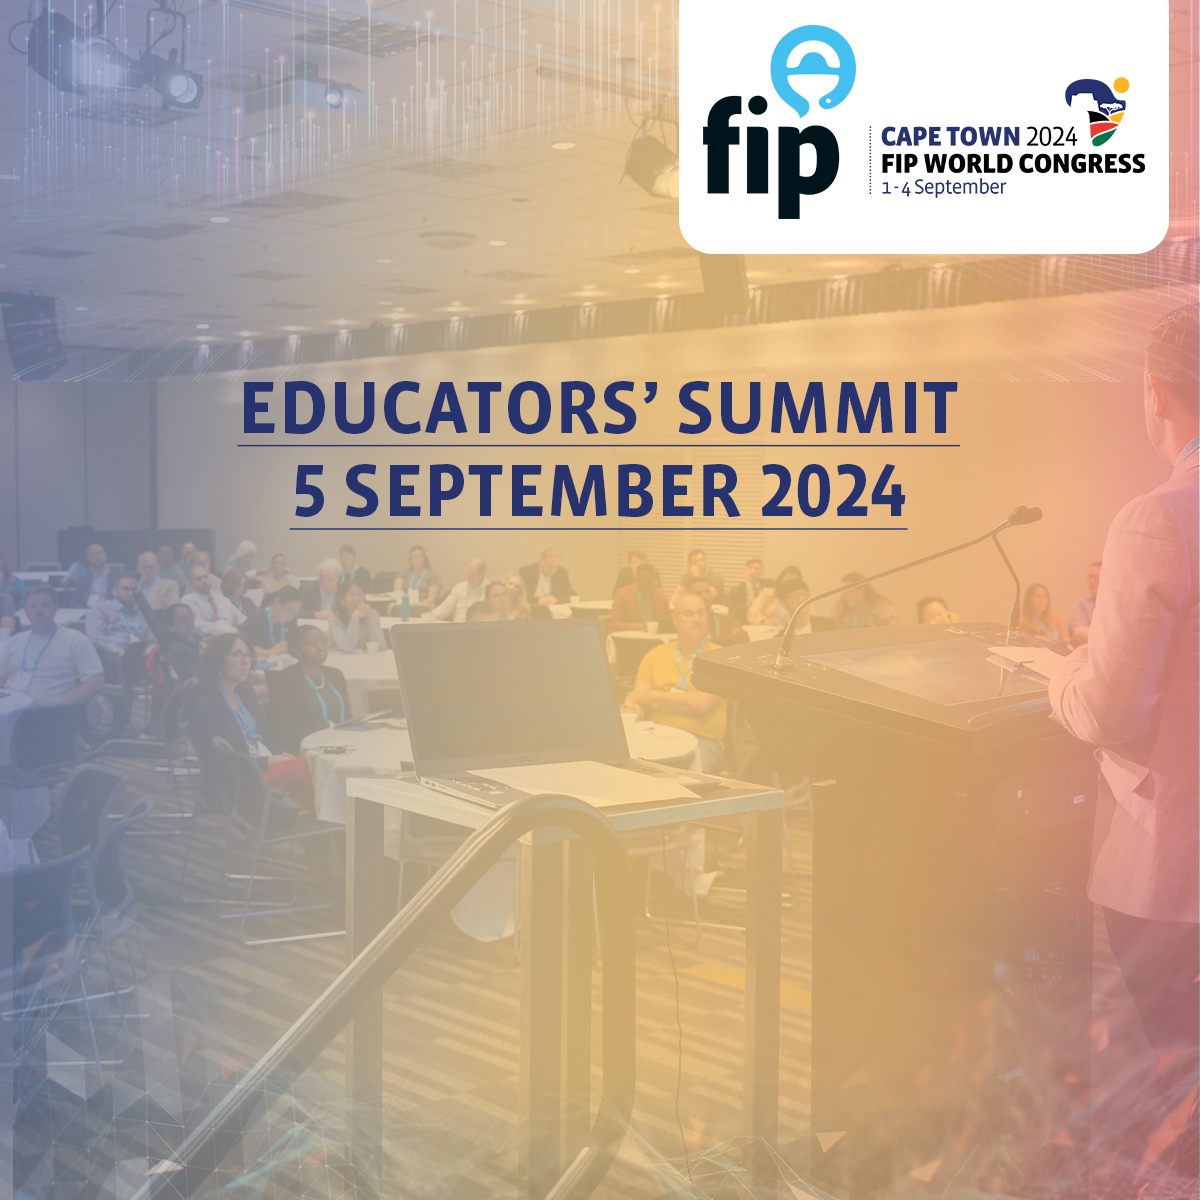 This special side session on 5 Sept after the FIP congress in #CapeTown will offer academicians, educators, trainers, & mentors a chance to celebrate our sector and discuss important determinants of pharmacy education and more. shorturl.at/zRU18